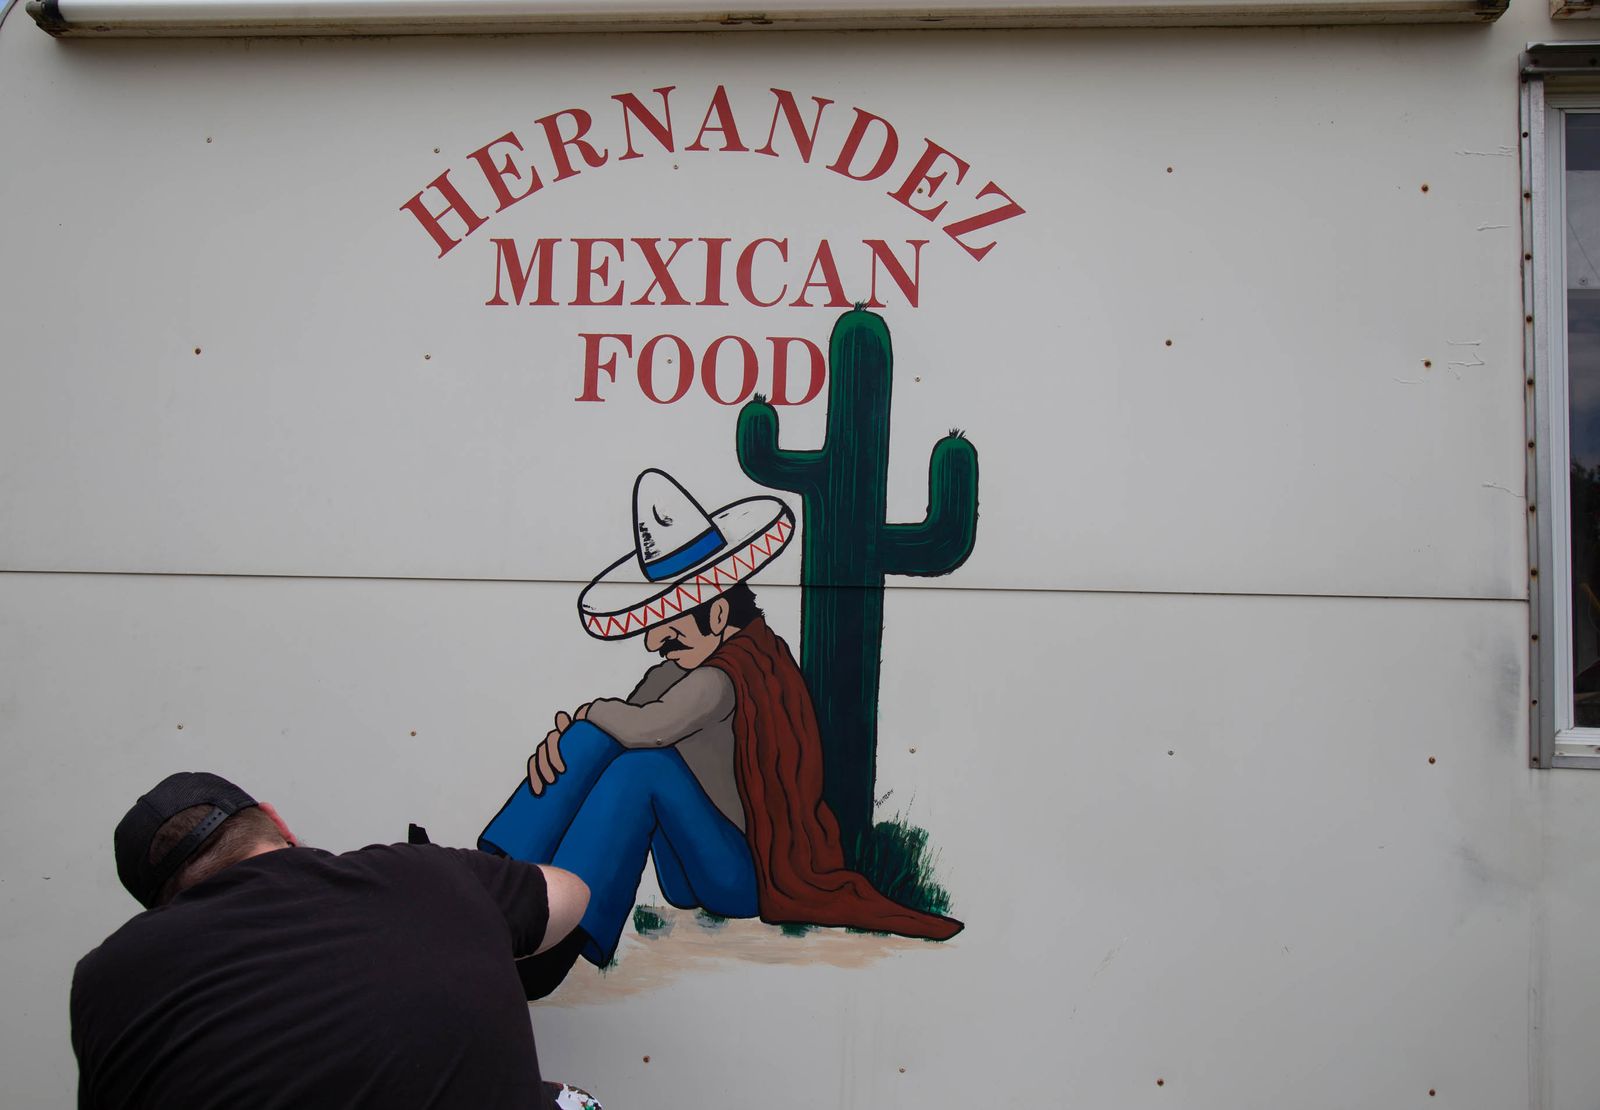 © Elisa Limon - Image from the Hernandez Mexican Food photography project